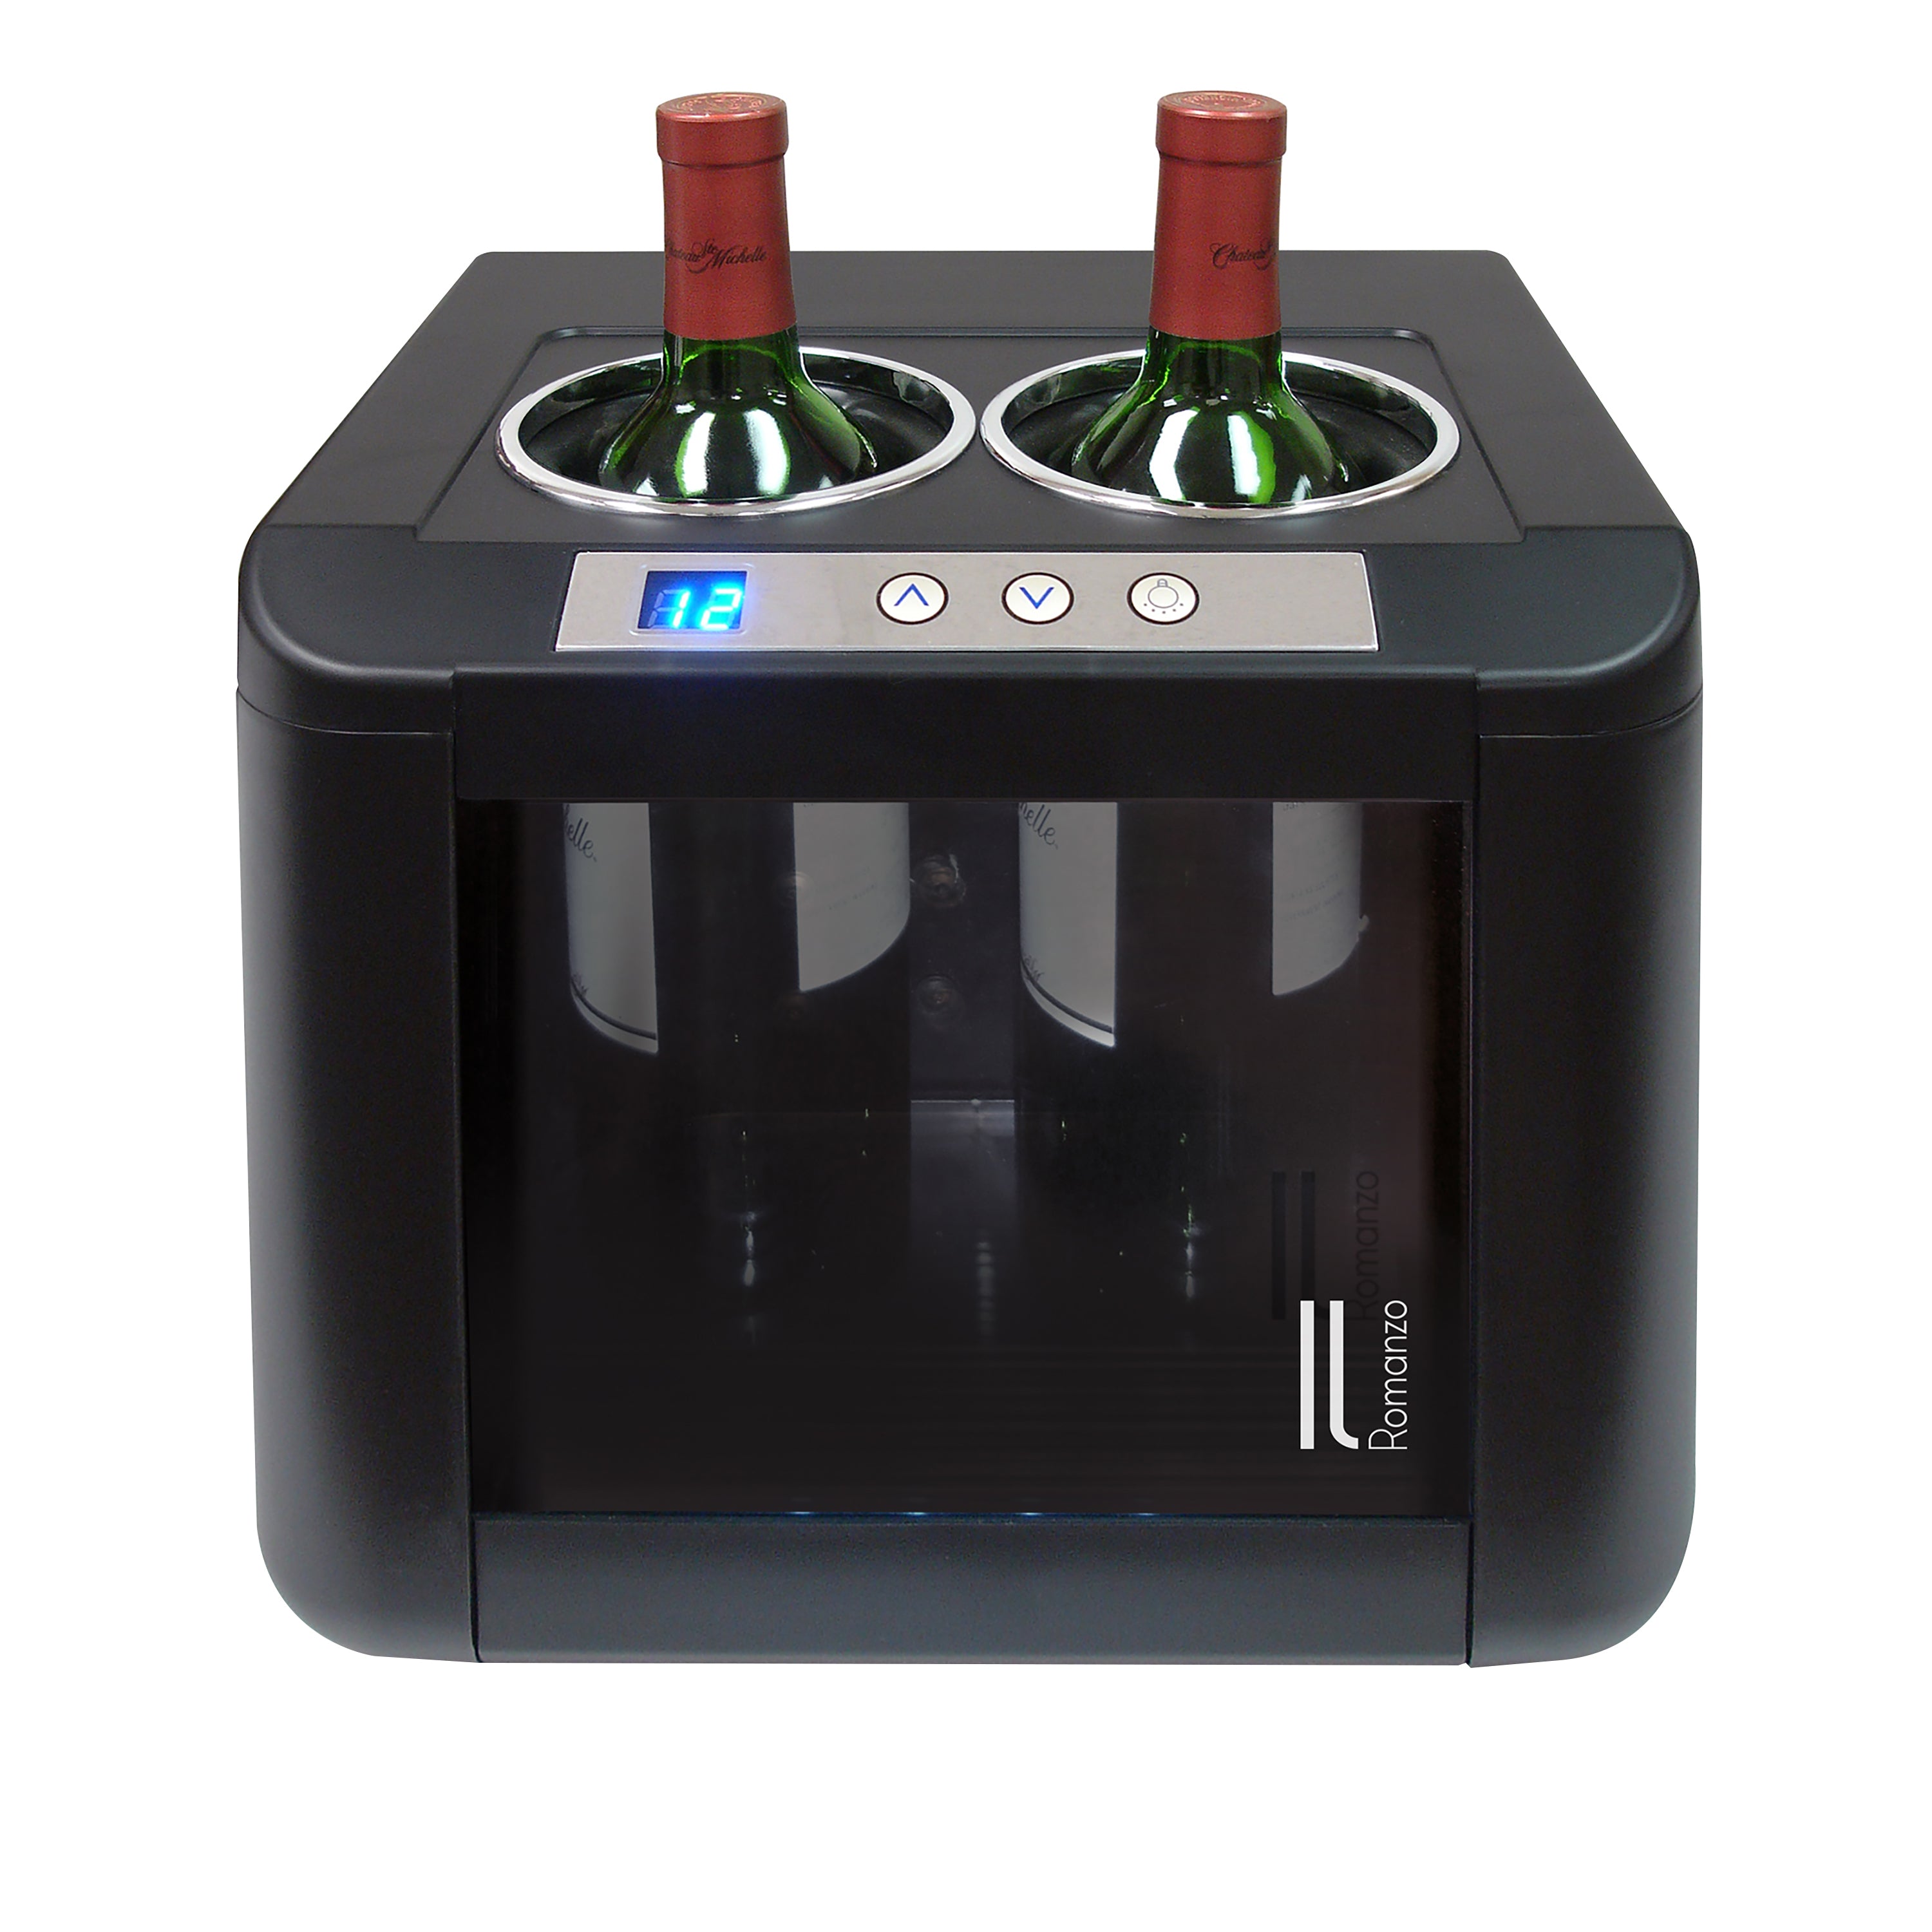 Vinotemp - IL-OW002, Vinotemp Il Romanzo Series Single-Zone Open Display Thermoelectric Wine Cooler, 2 Bottle Capacity, in Black